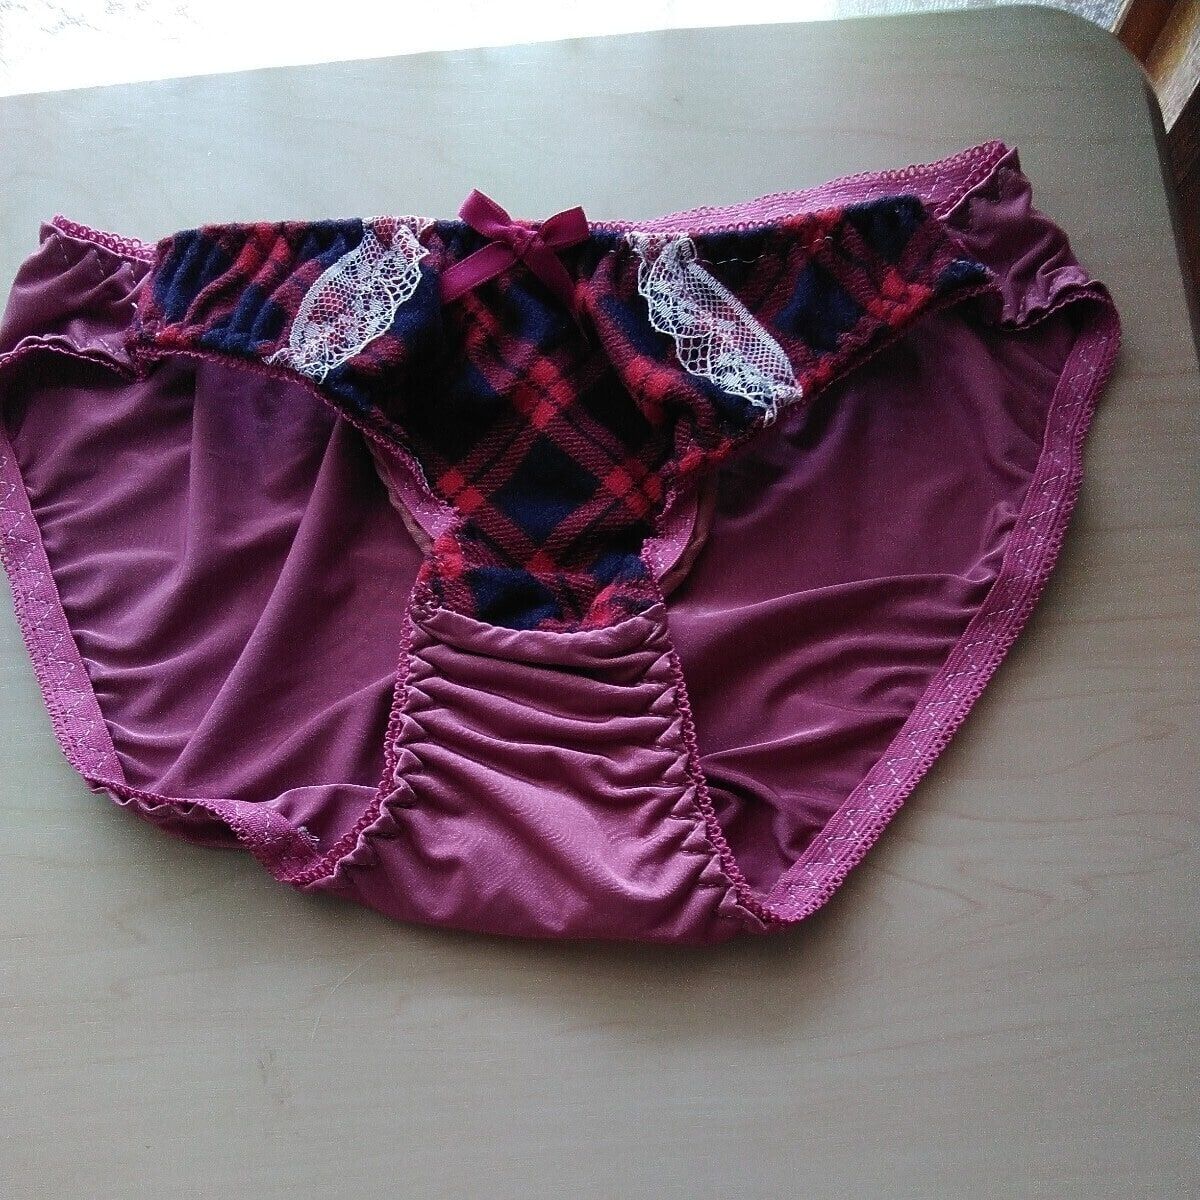 Friend's Panty Collection 2 #37